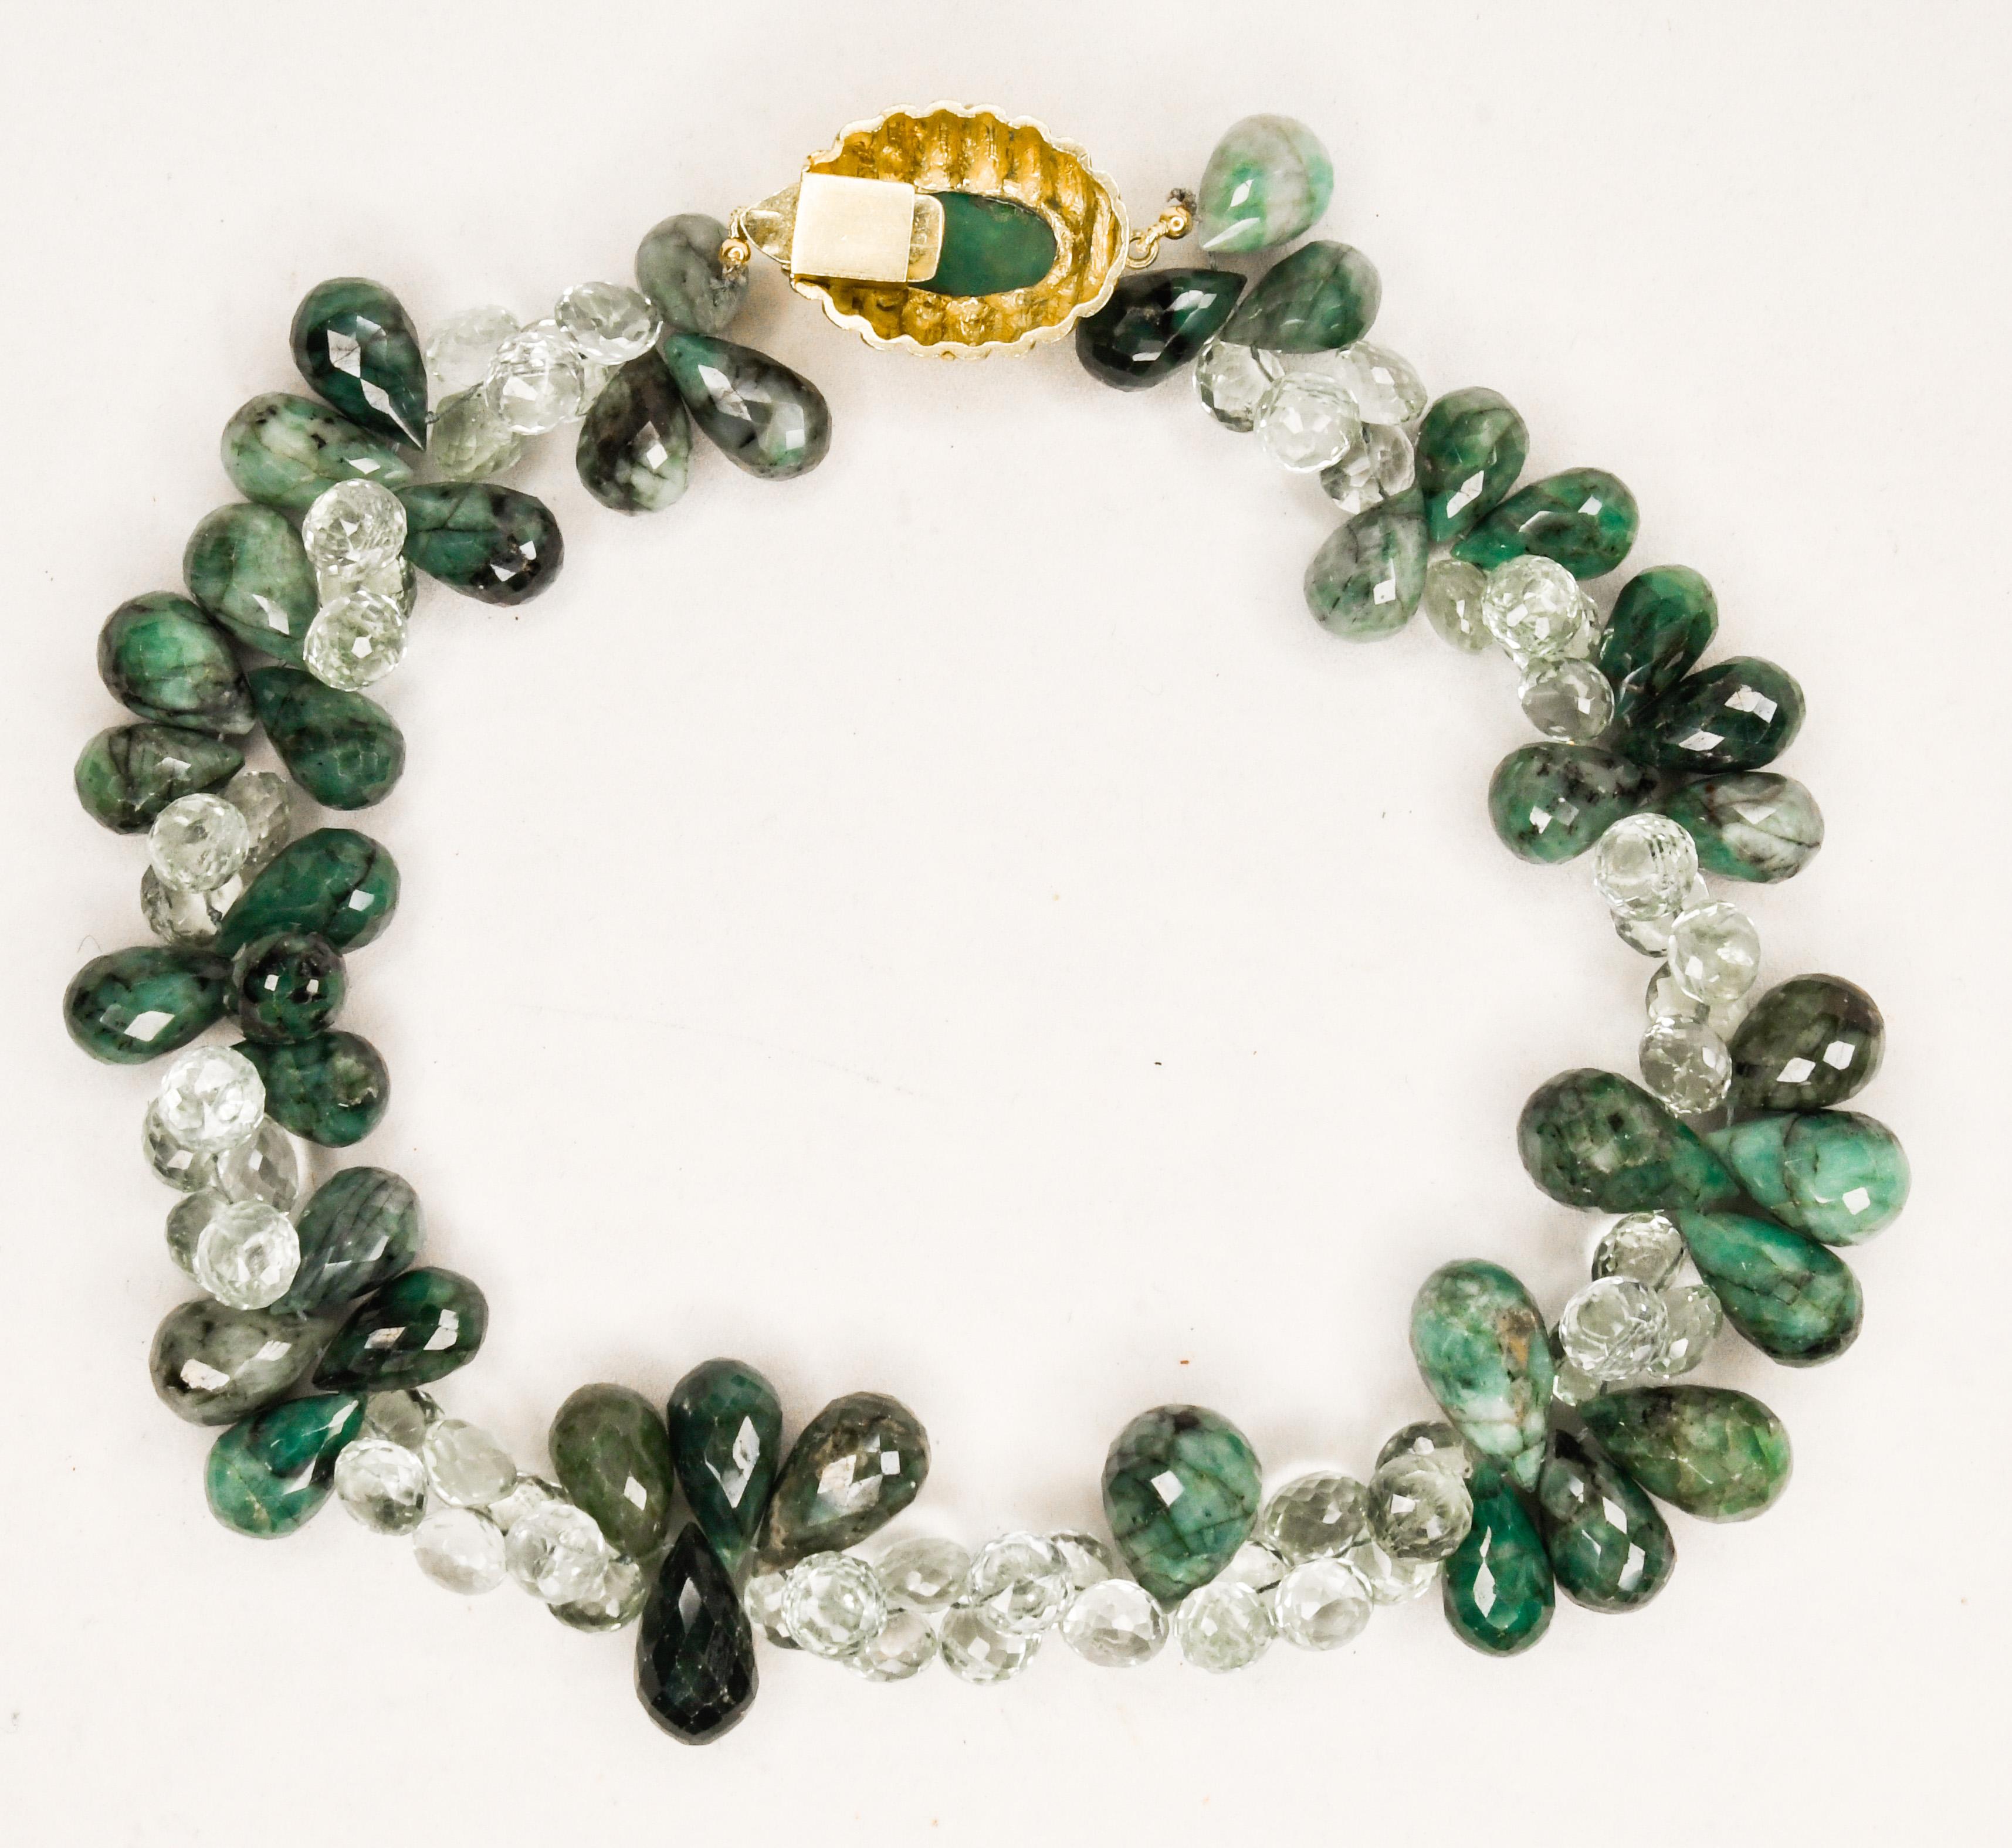 raw emerald necklace